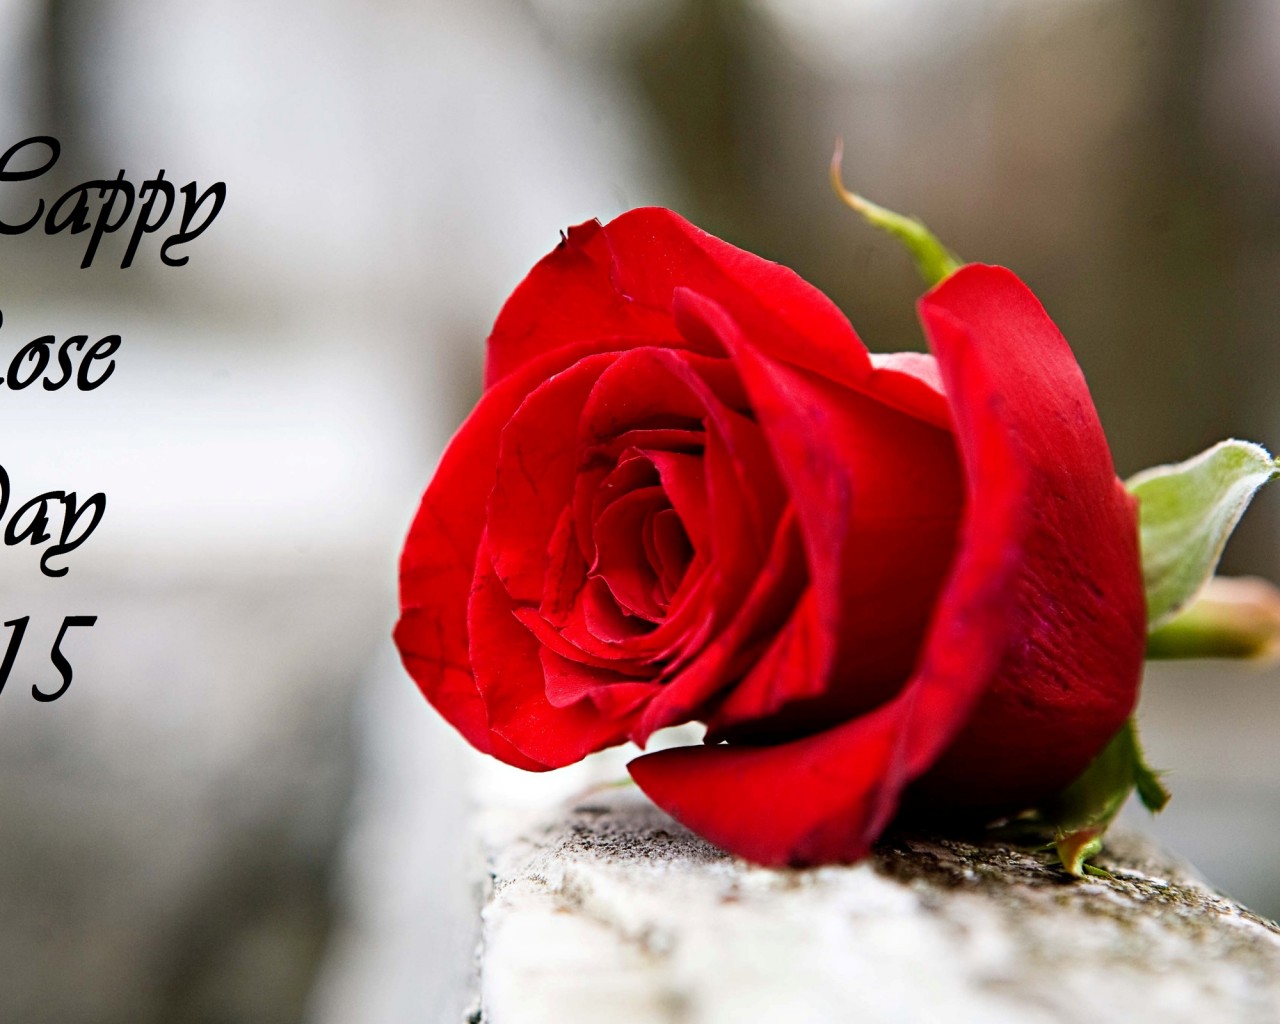 Happy Rose Day Image Wallpaper13